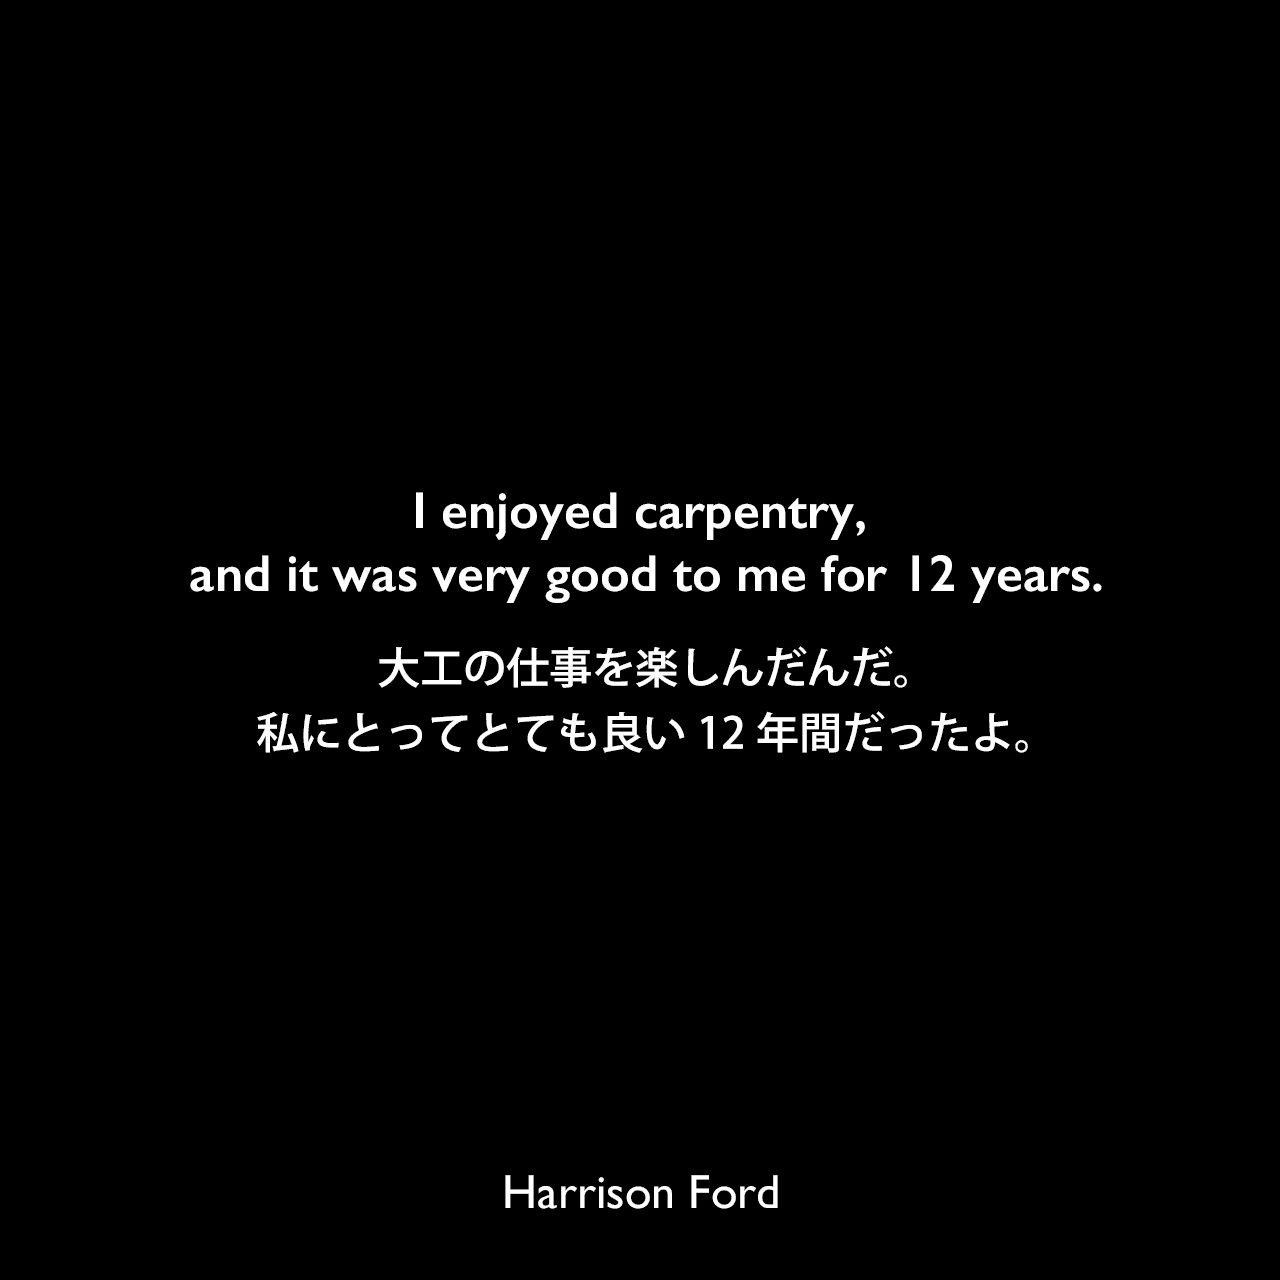 I enjoyed carpentry, and it was very good to me for 12 years.大工の仕事を楽しんだんだ。私にとってとても良い12年間だったよ。Harrison Ford